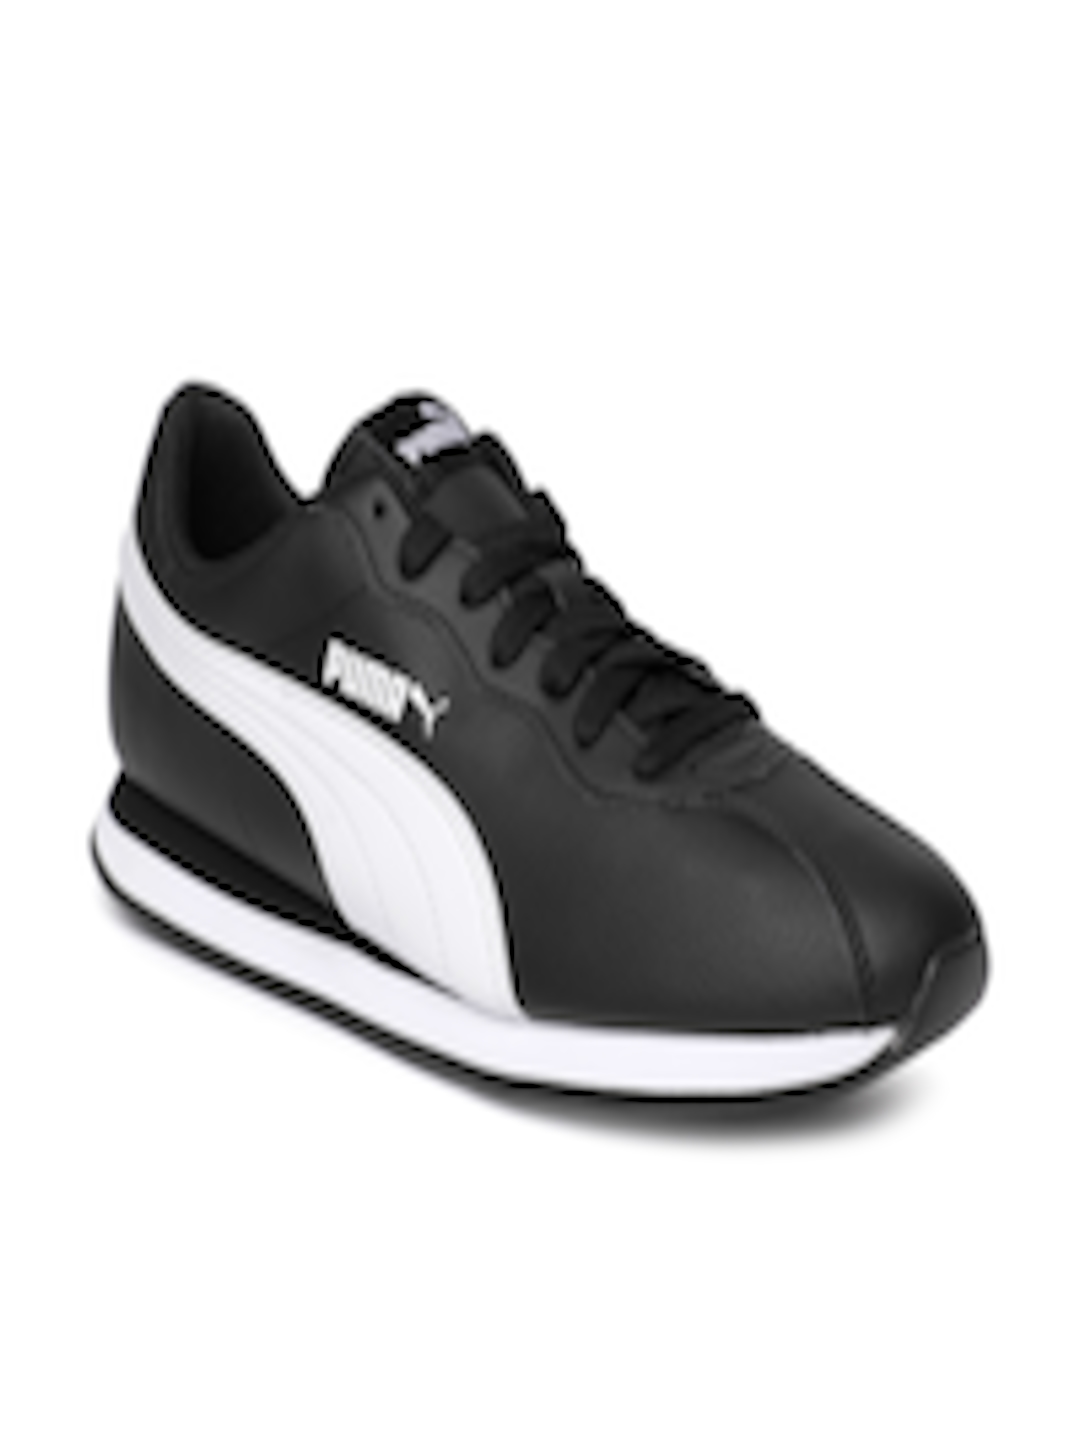 Buy Puma Unisex Black Turin II Sneakers - Casual Shoes for Unisex ...